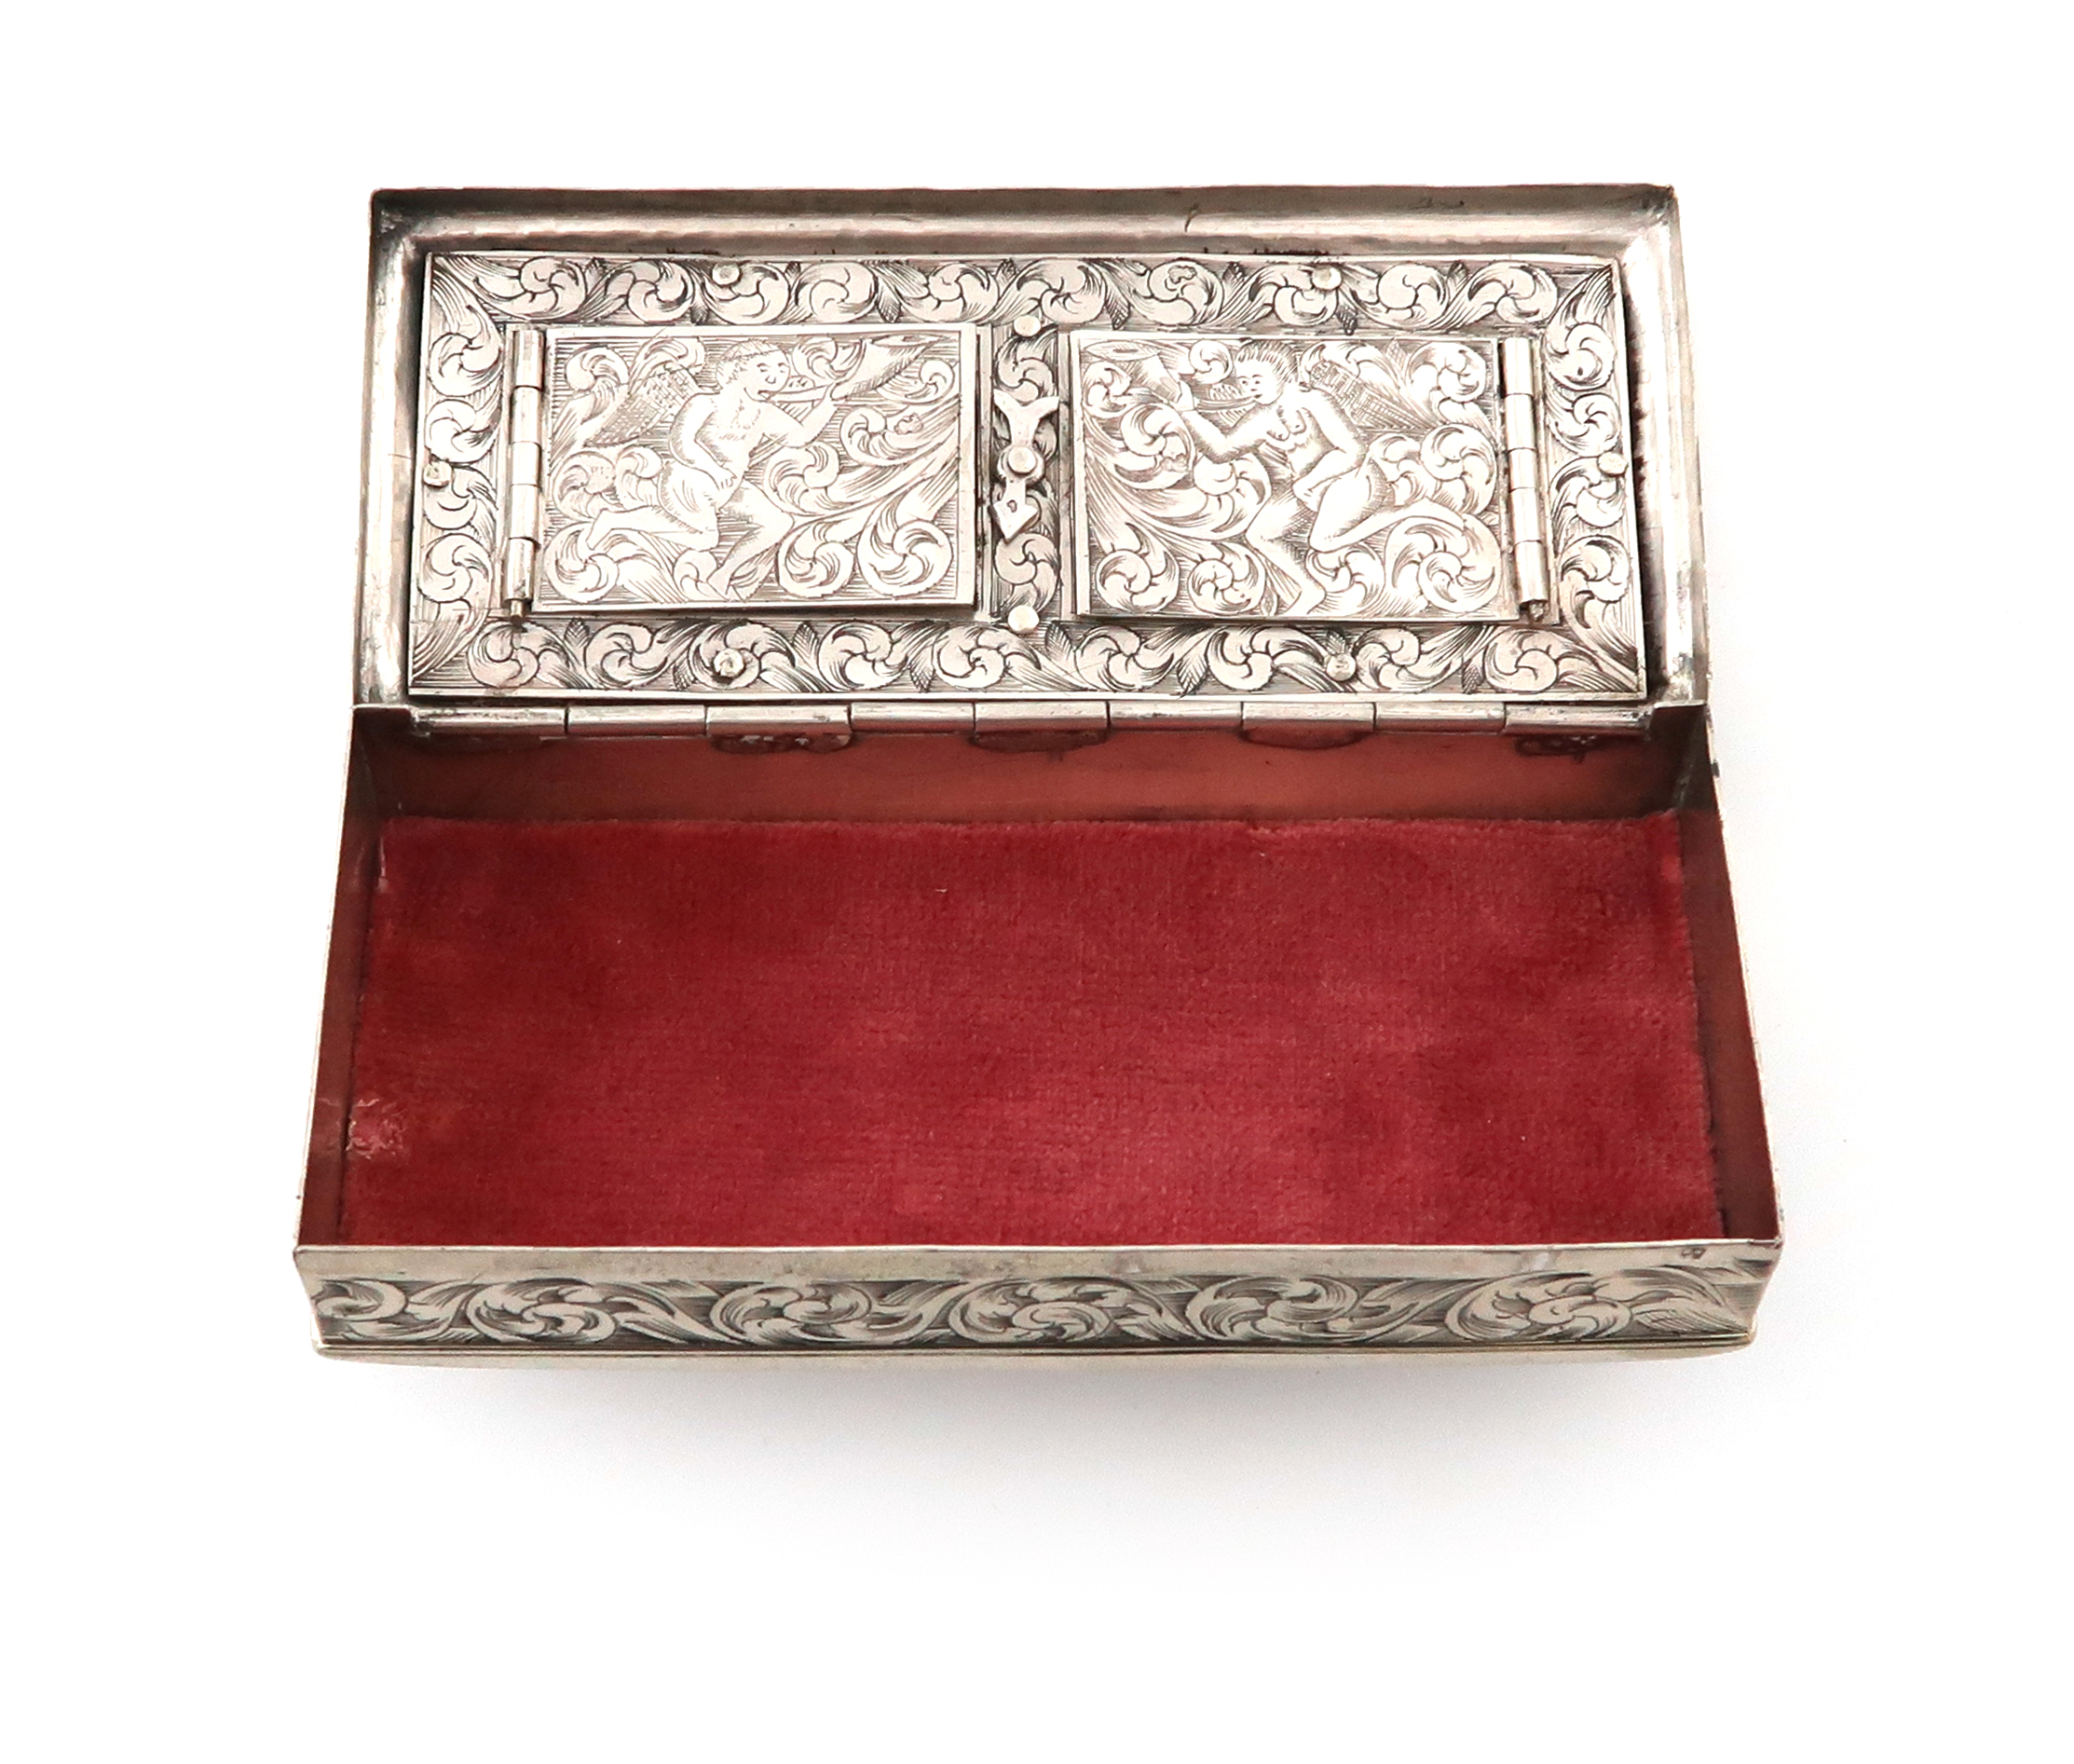 A 19th century Dutch silver tobacco box, by Rinze Jans Spaanstra, in the early 17th century - Image 5 of 6